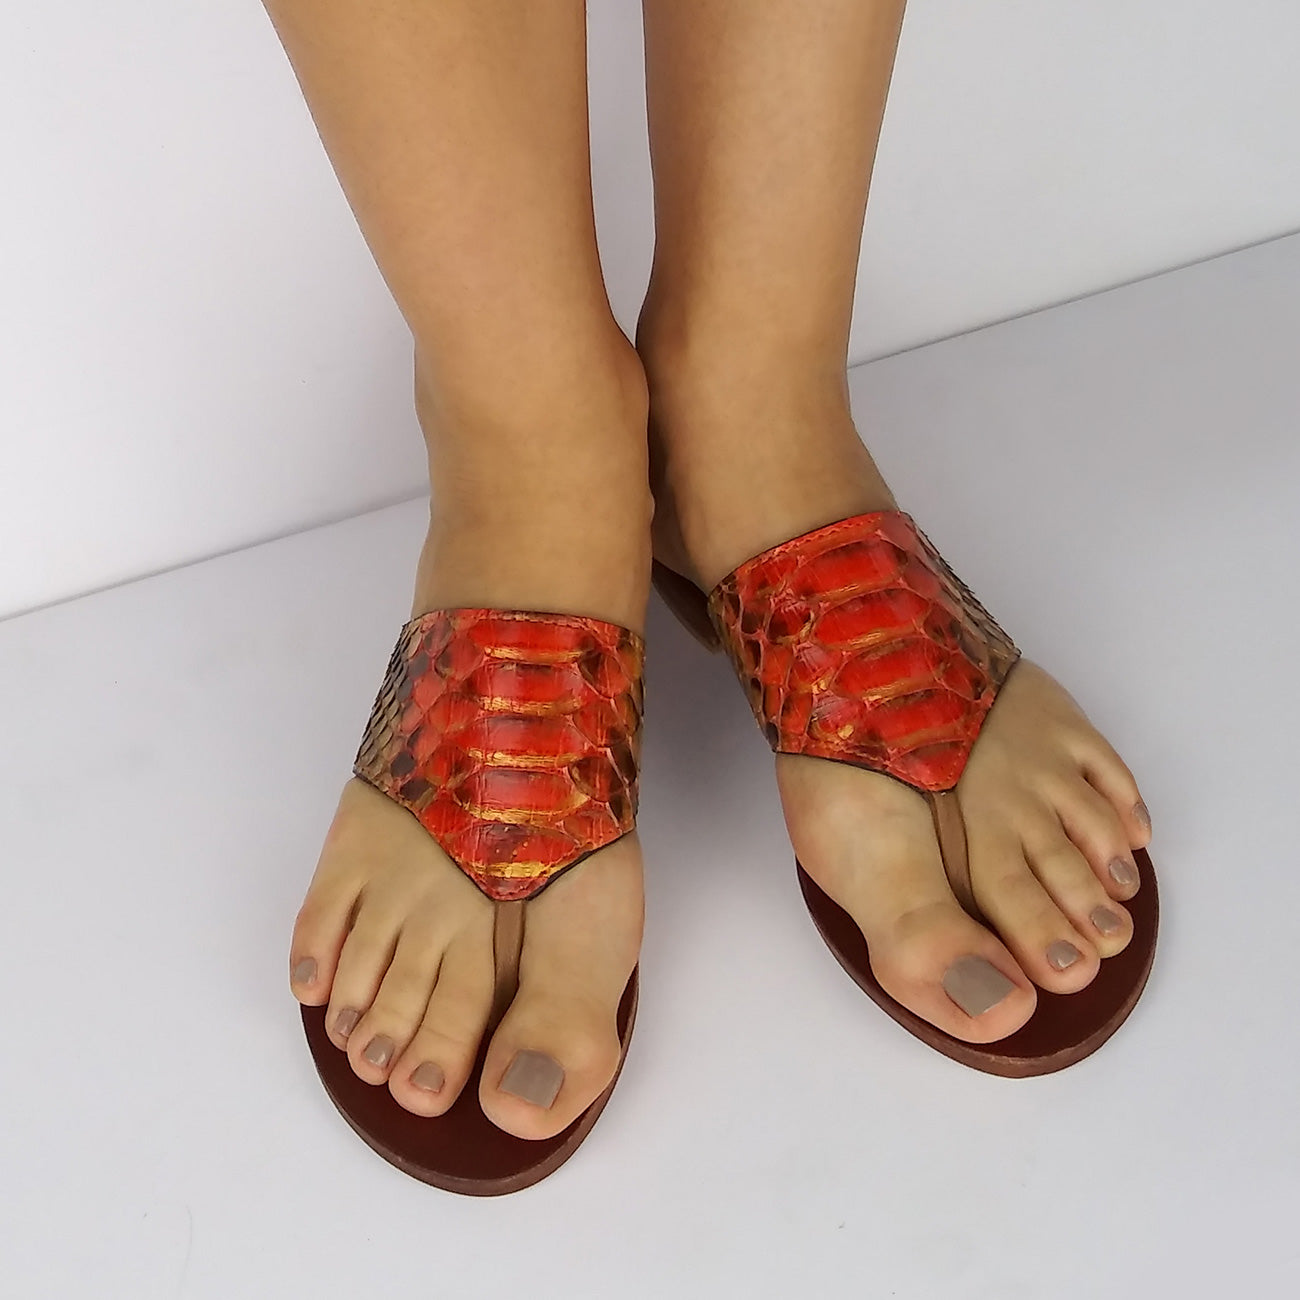 ONLY SIZE 7 AVAILABLE. Genuine Python Orange and Gold Flat Thong Sandals